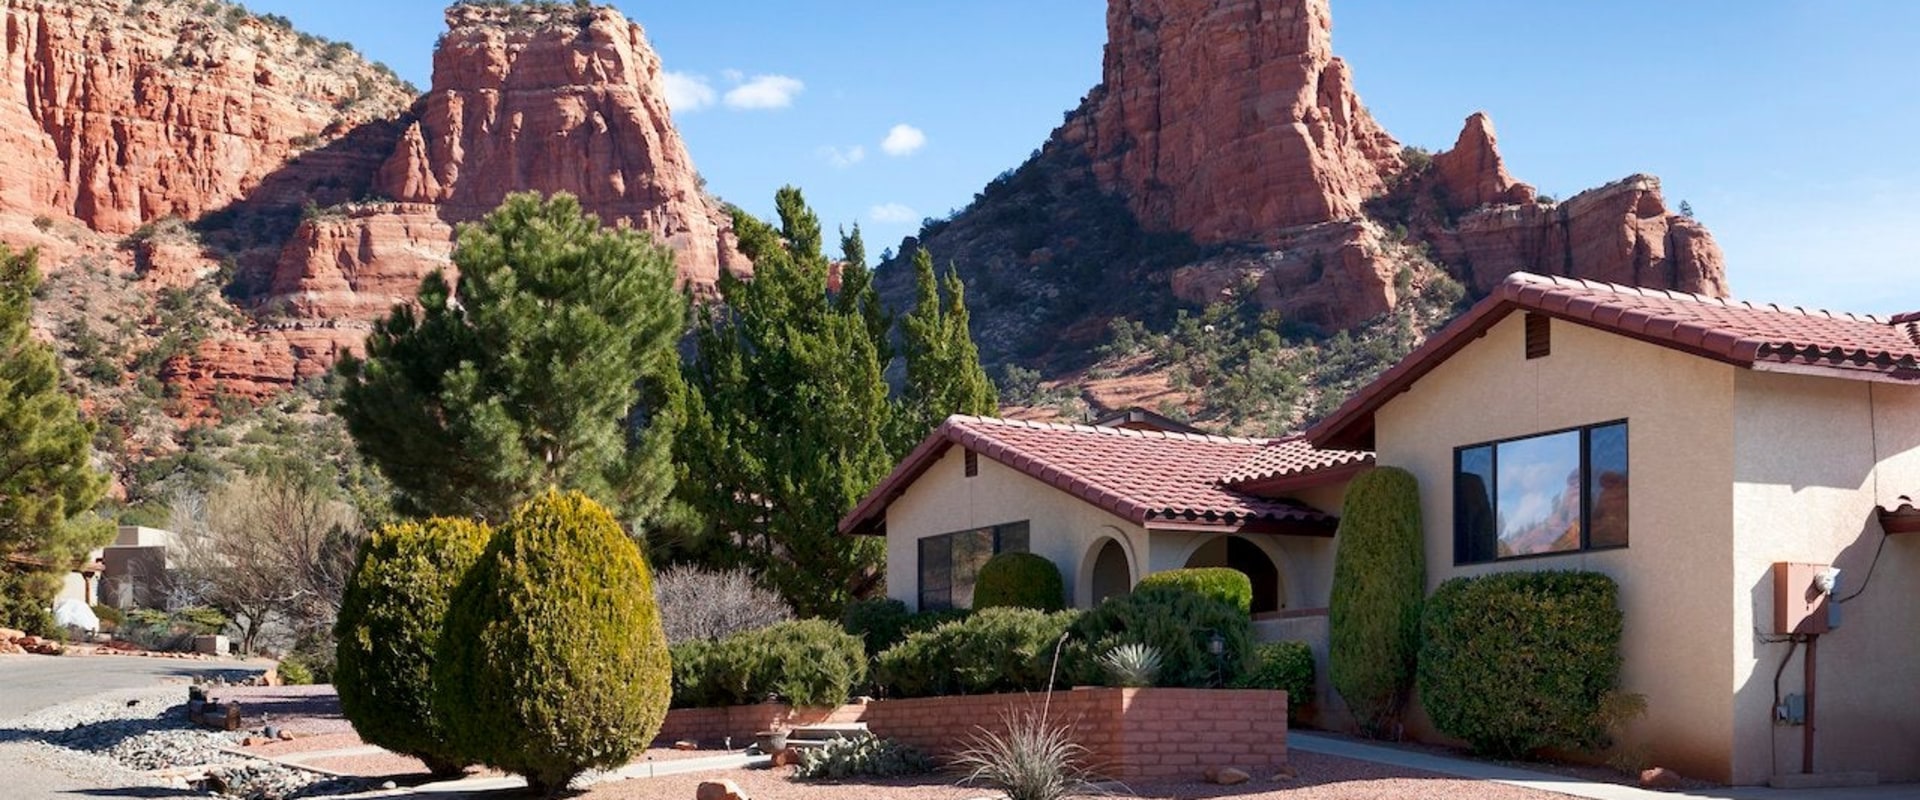 Qualifying for a Mortgage in Arizona